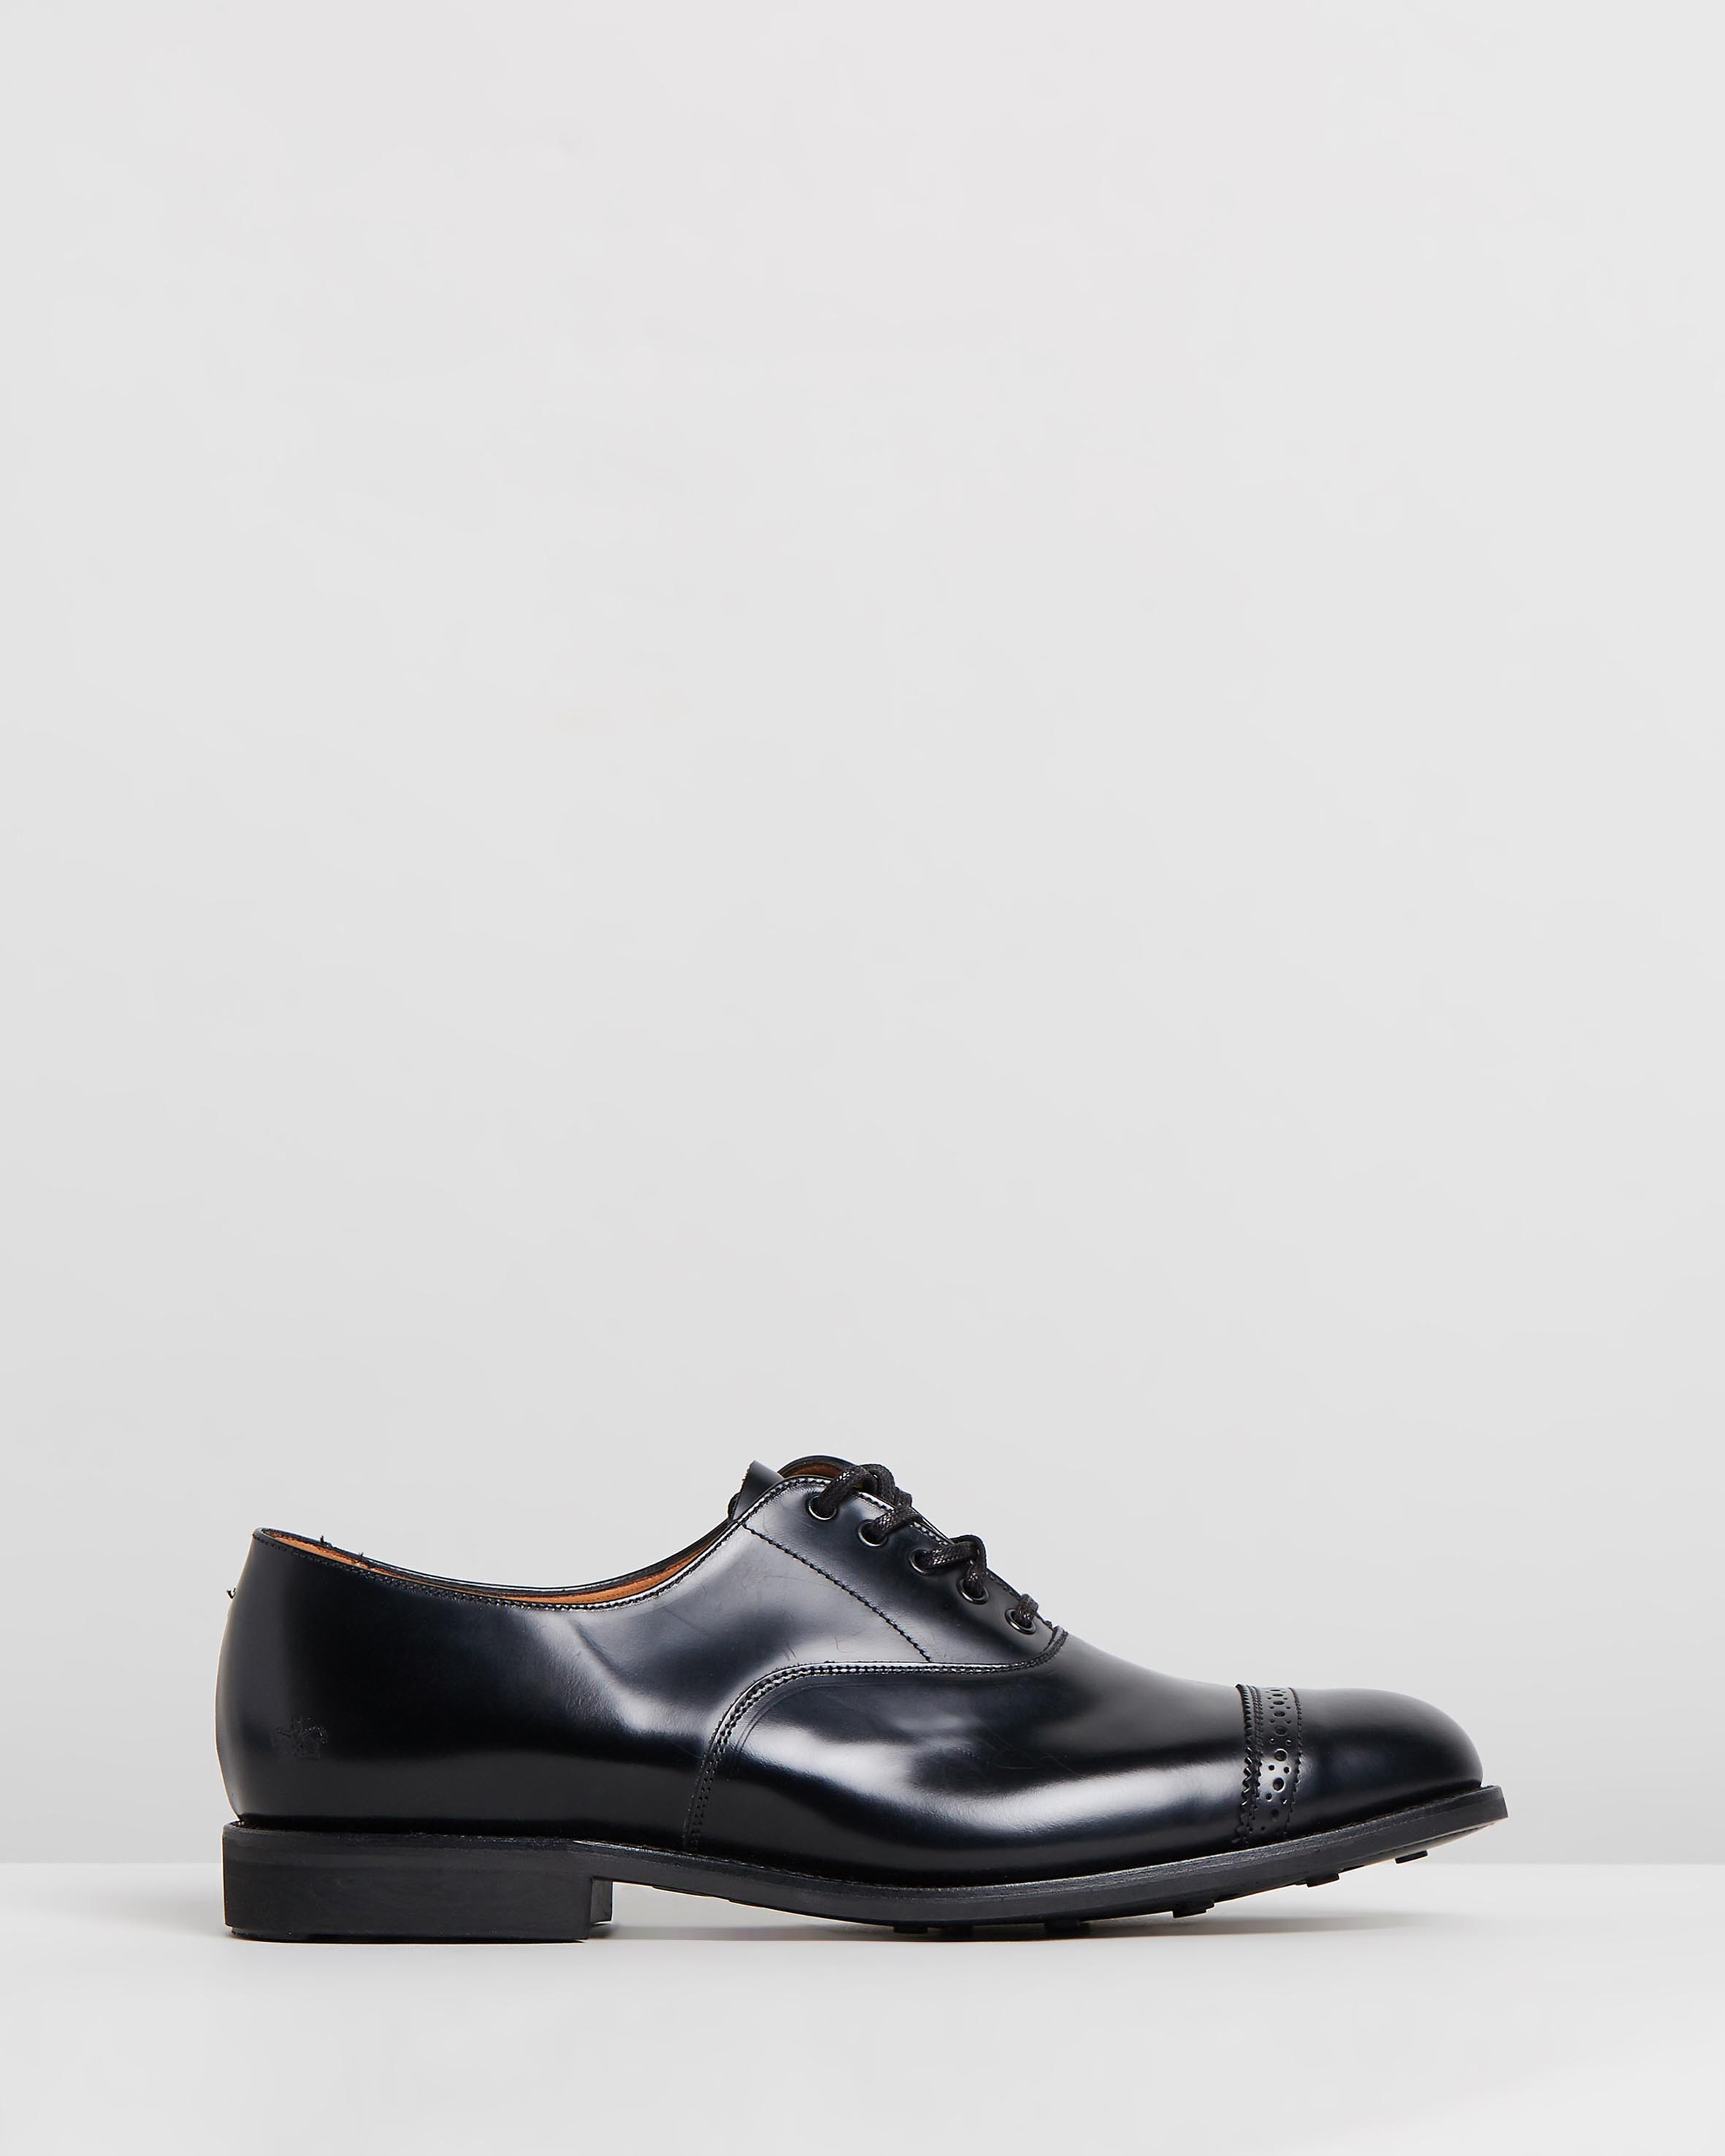 Military Punched Cap Oxford Black by Sanders | ShoeSales